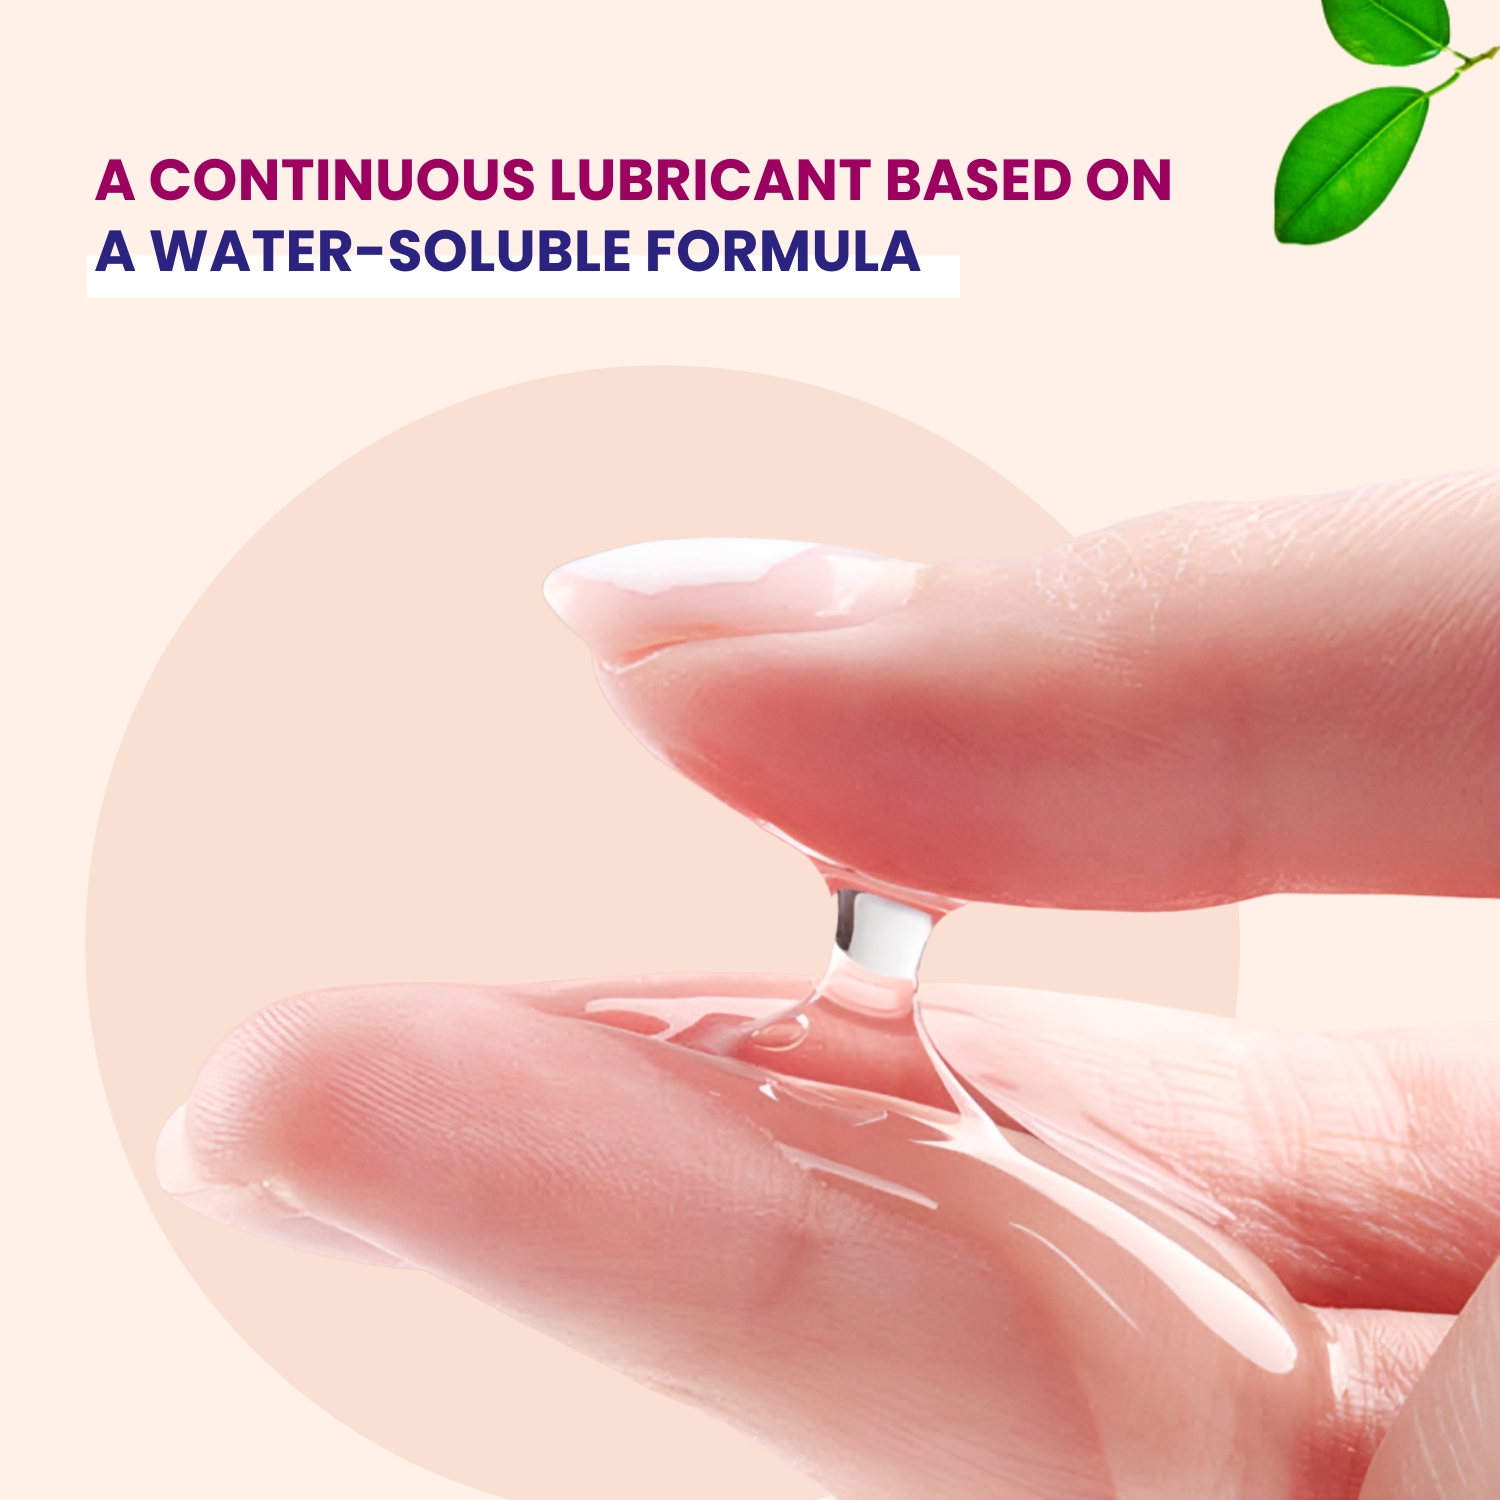 GynoCup Menstrual Cup Lubricant Water Based & PH Balanced, Helps To Wear Menstrual Cup (100 Ml)